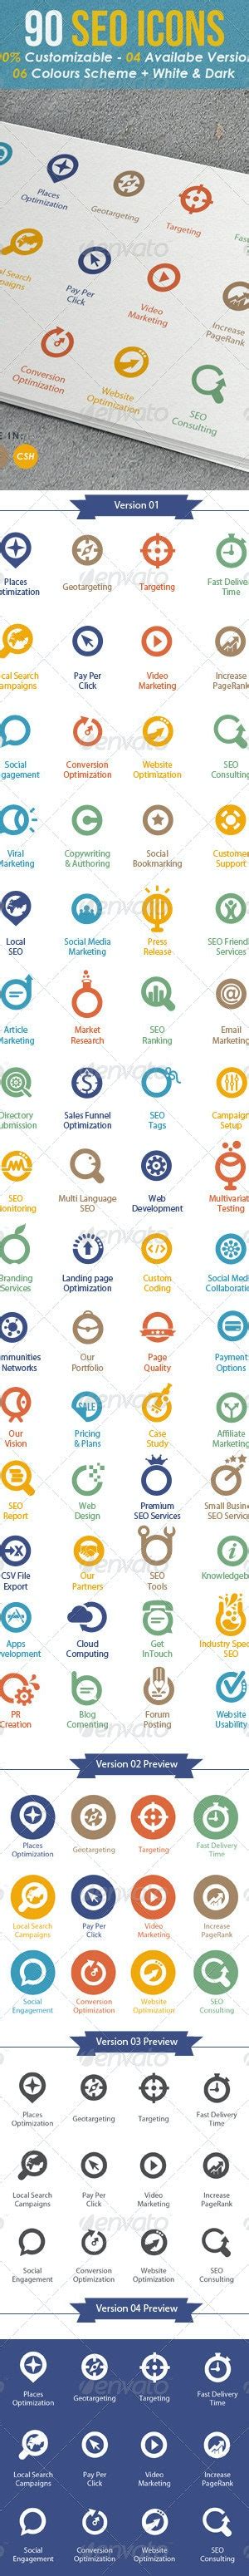 Targo Premium Seo Industry Icons By Kh2838 Graphicriver